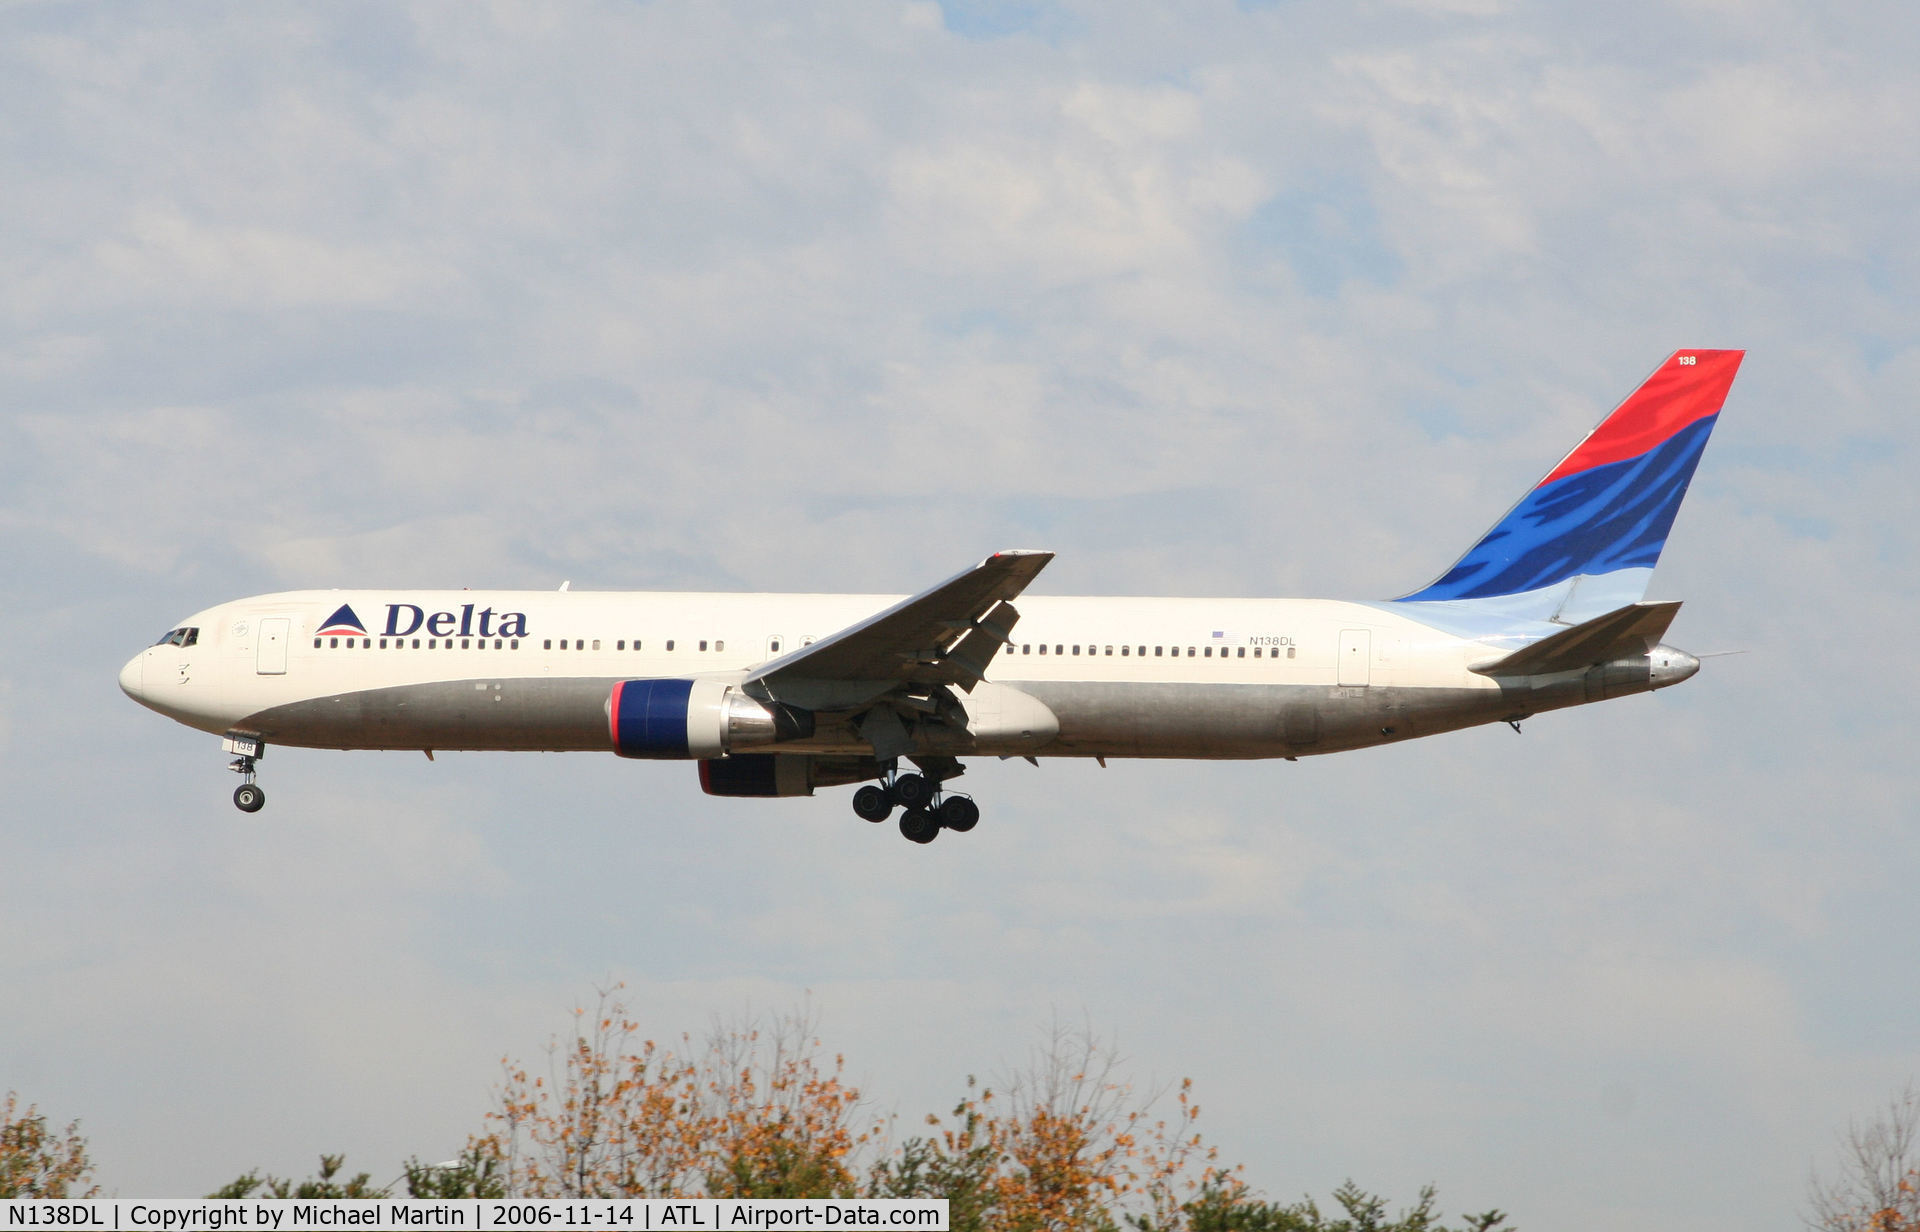 N138DL, 1991 Boeing 767-332 C/N 25409, Over the numbers of 27L